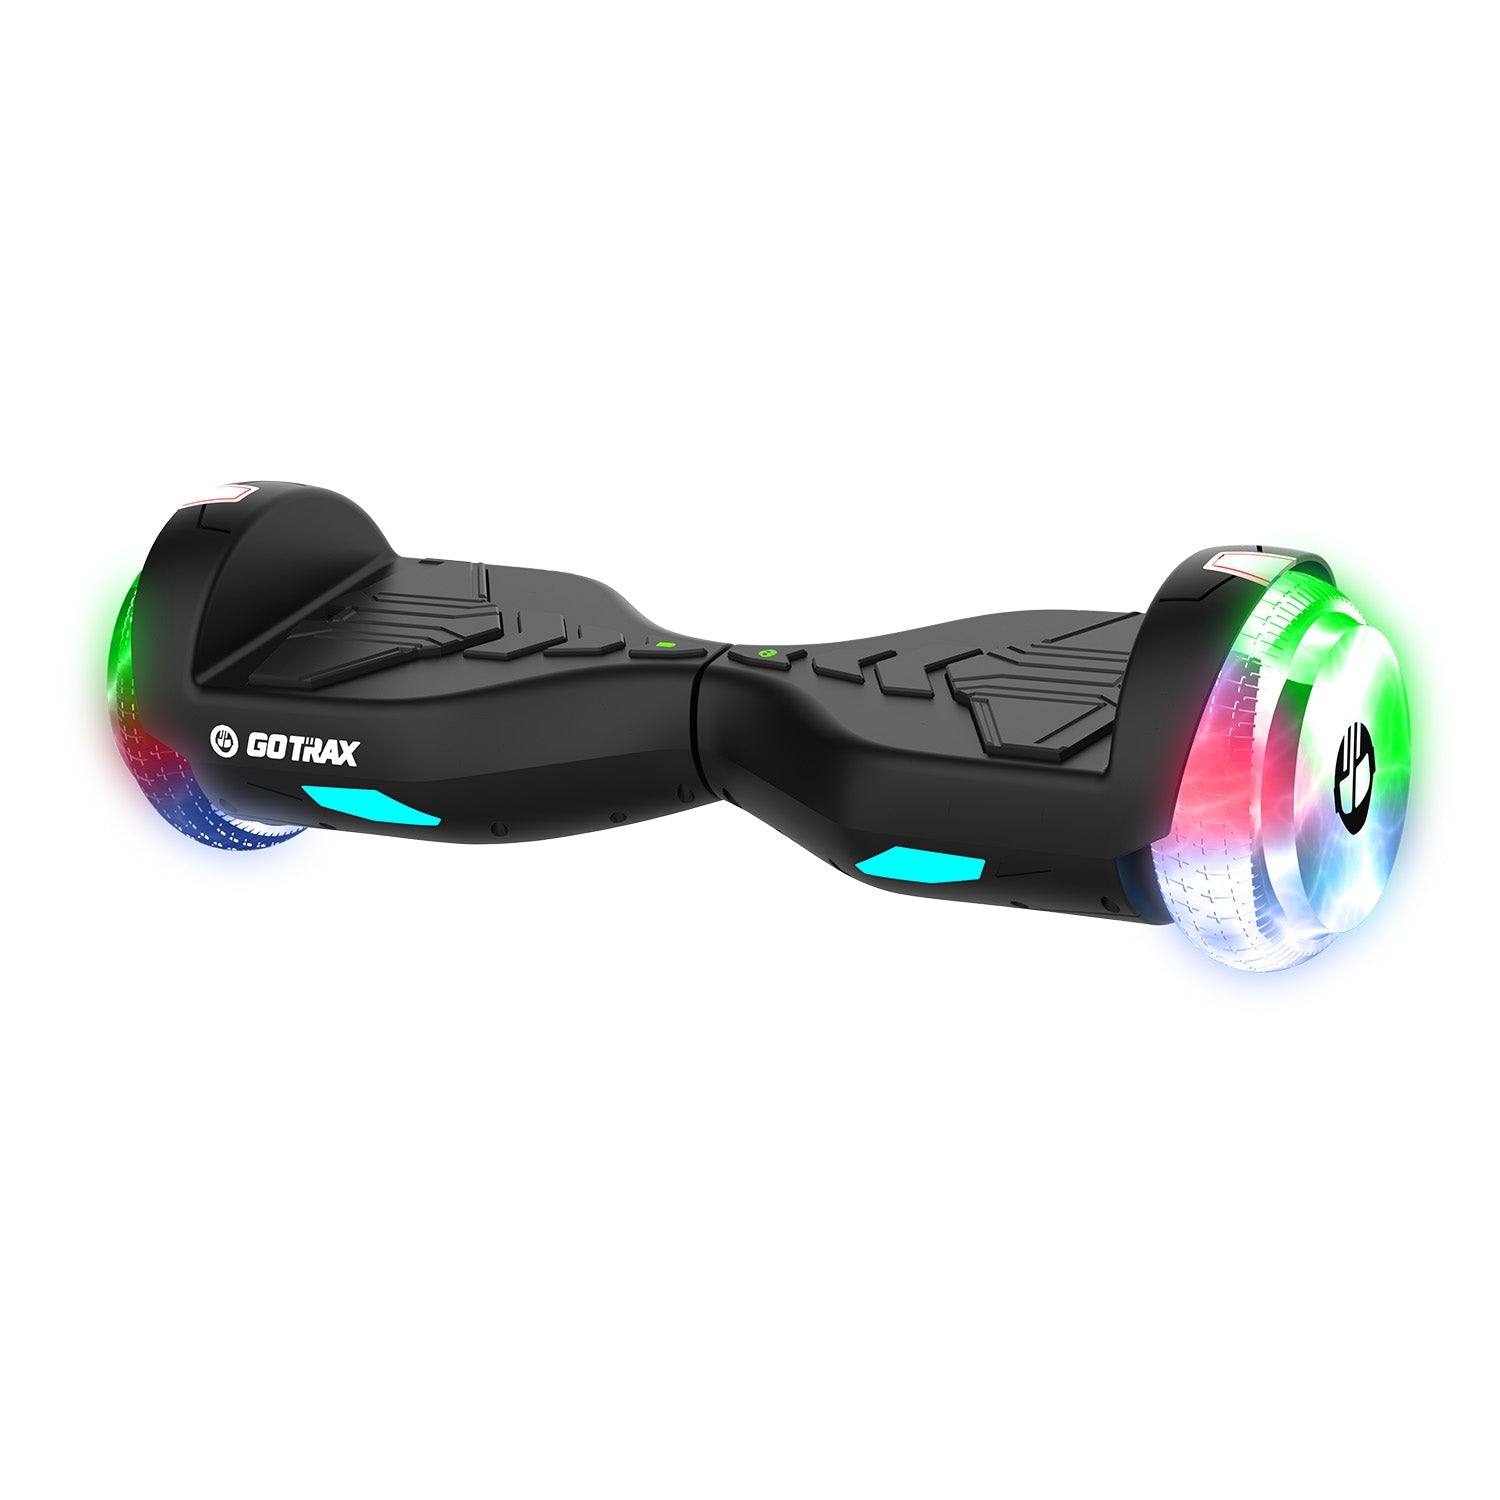 Pulse Max Hoverboard 6.3" with LED GOTRAX.com